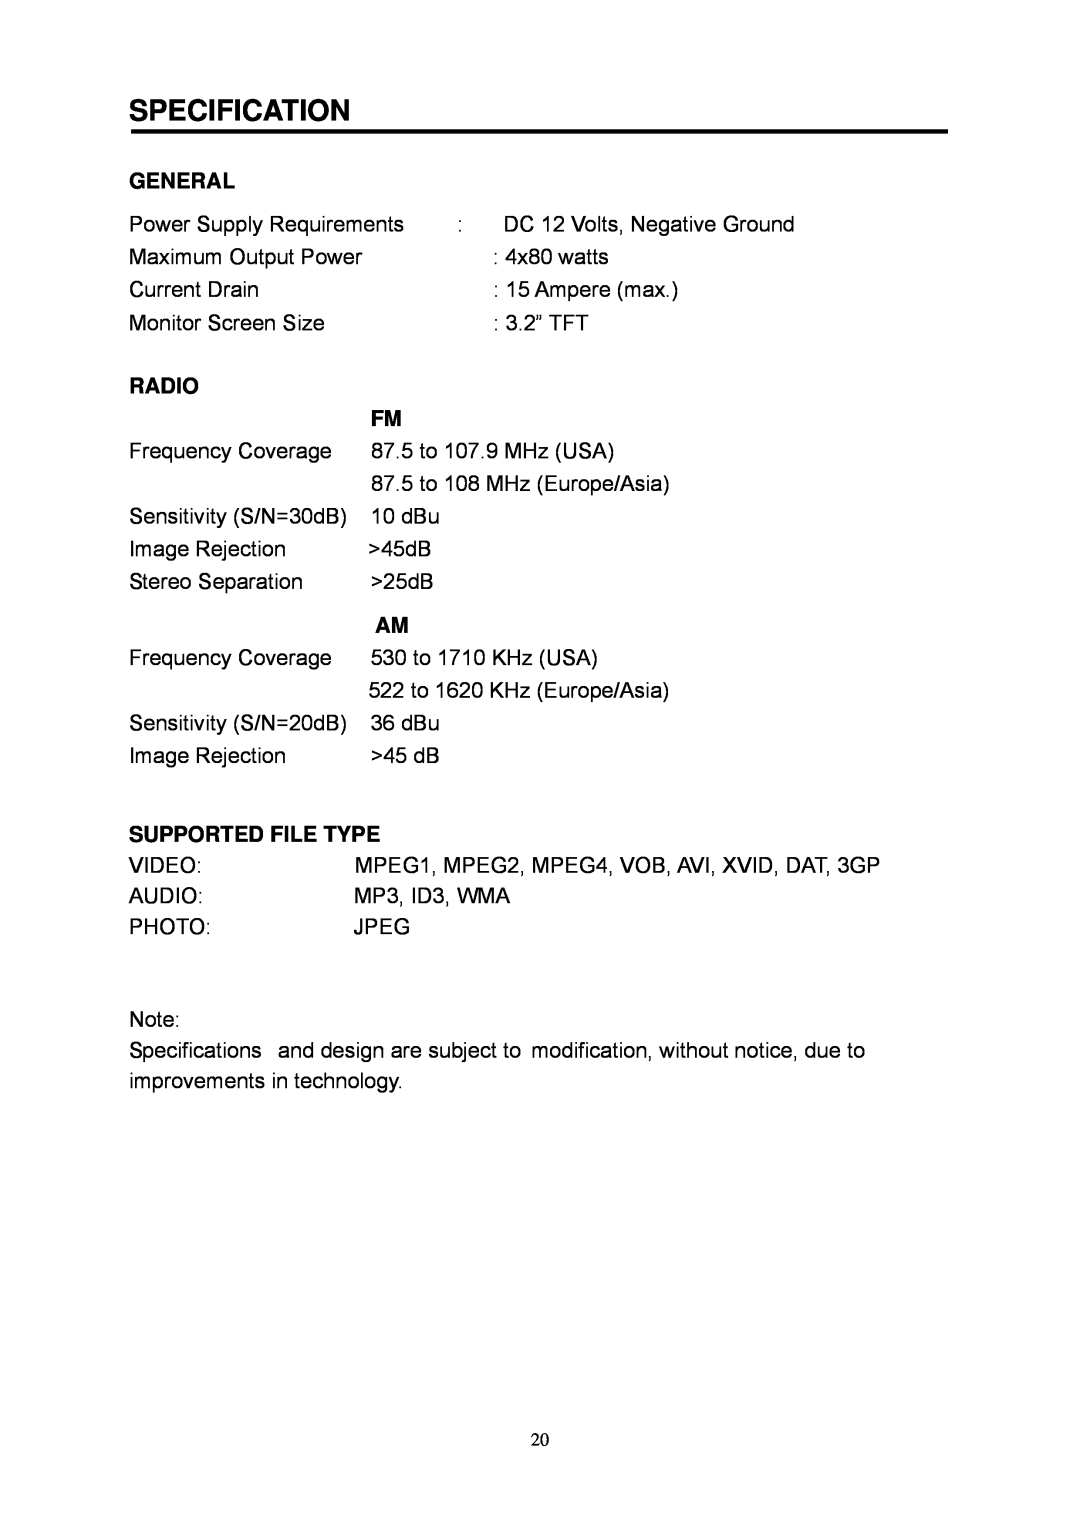 Boss Audio Systems BV7280 manual Specification, General, Radio, Supported File Type 